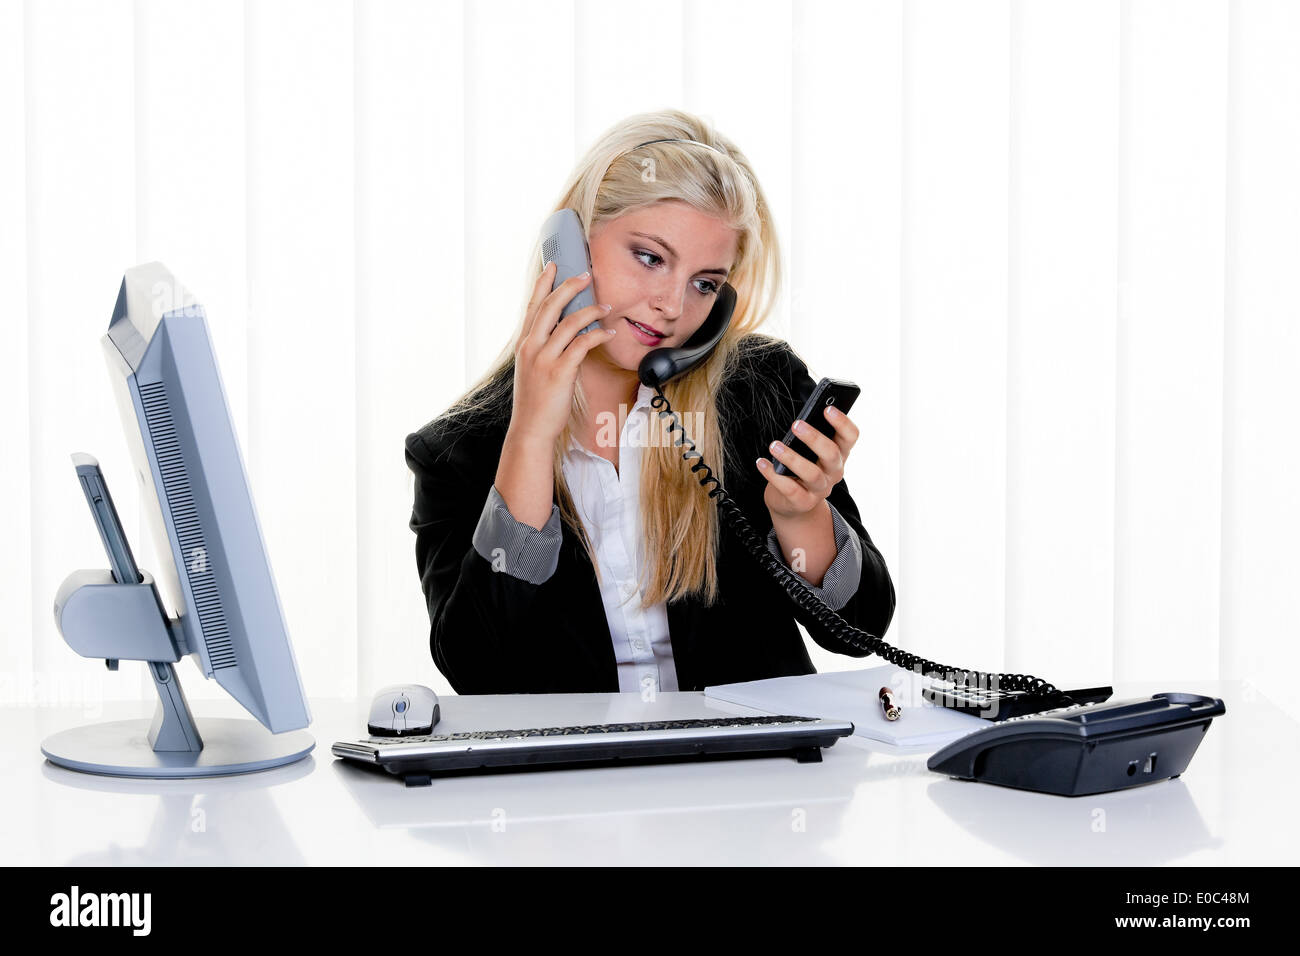 Young woman with problems and stress in the office., Junge Frau mit Problemen und Stress im Buero. Stock Photo